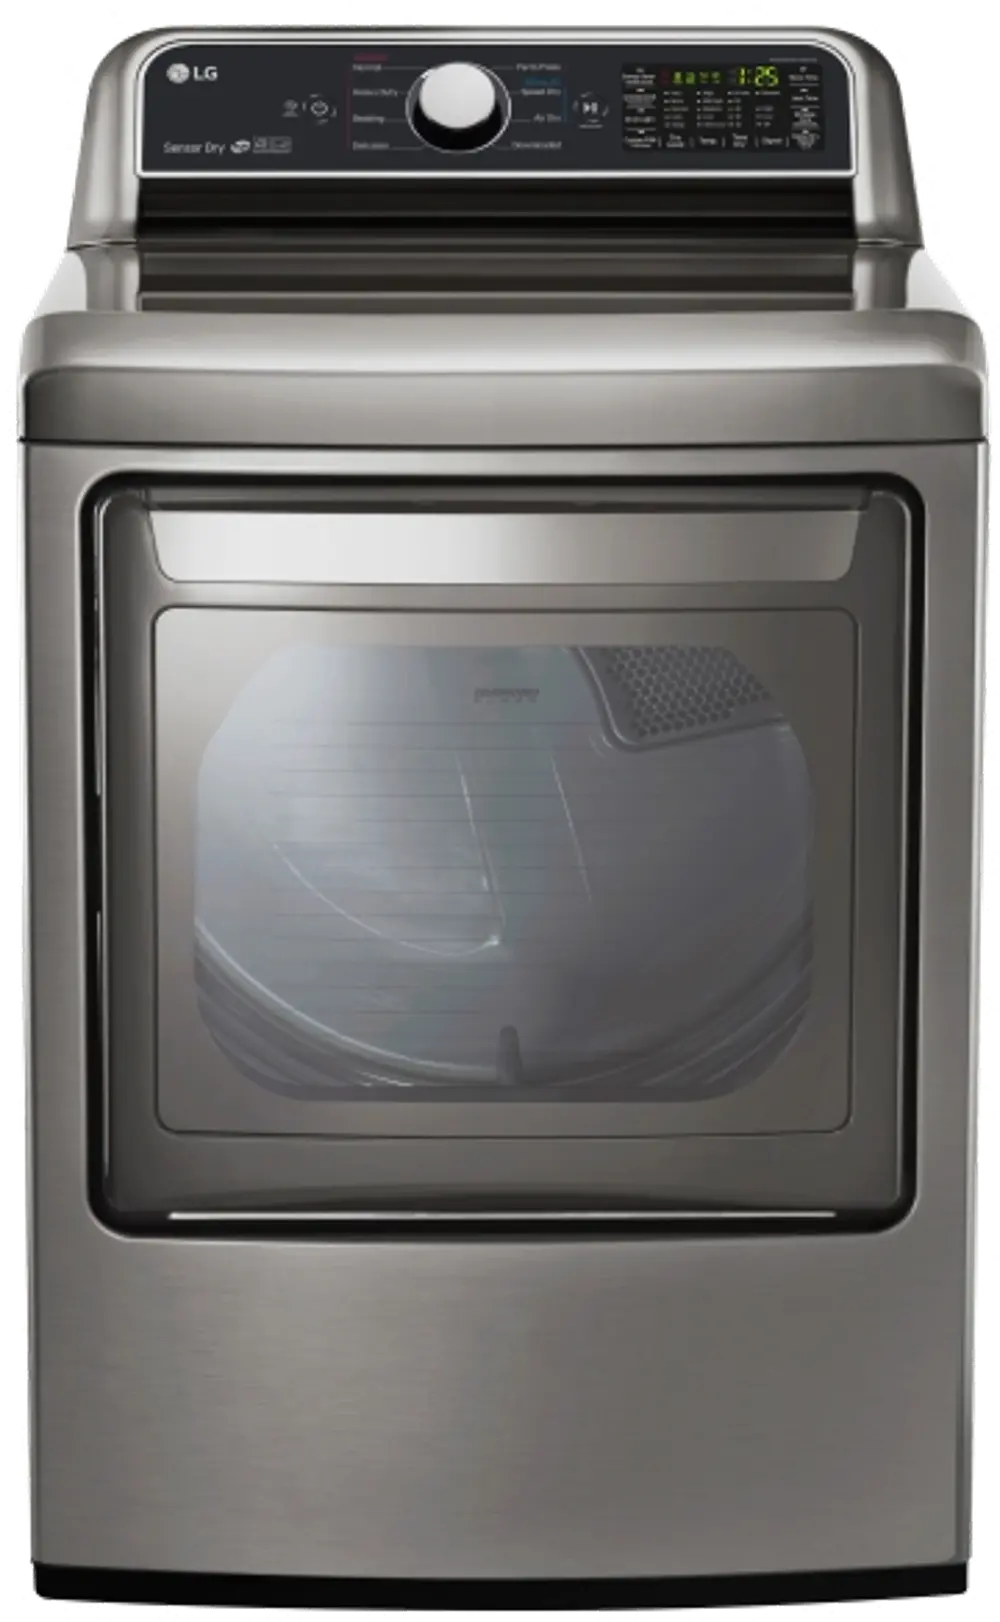 DLE7200VE LG Electric Dryer with Sensor Dry Technology - 7.3 cu. ft. Graphite Steel-1